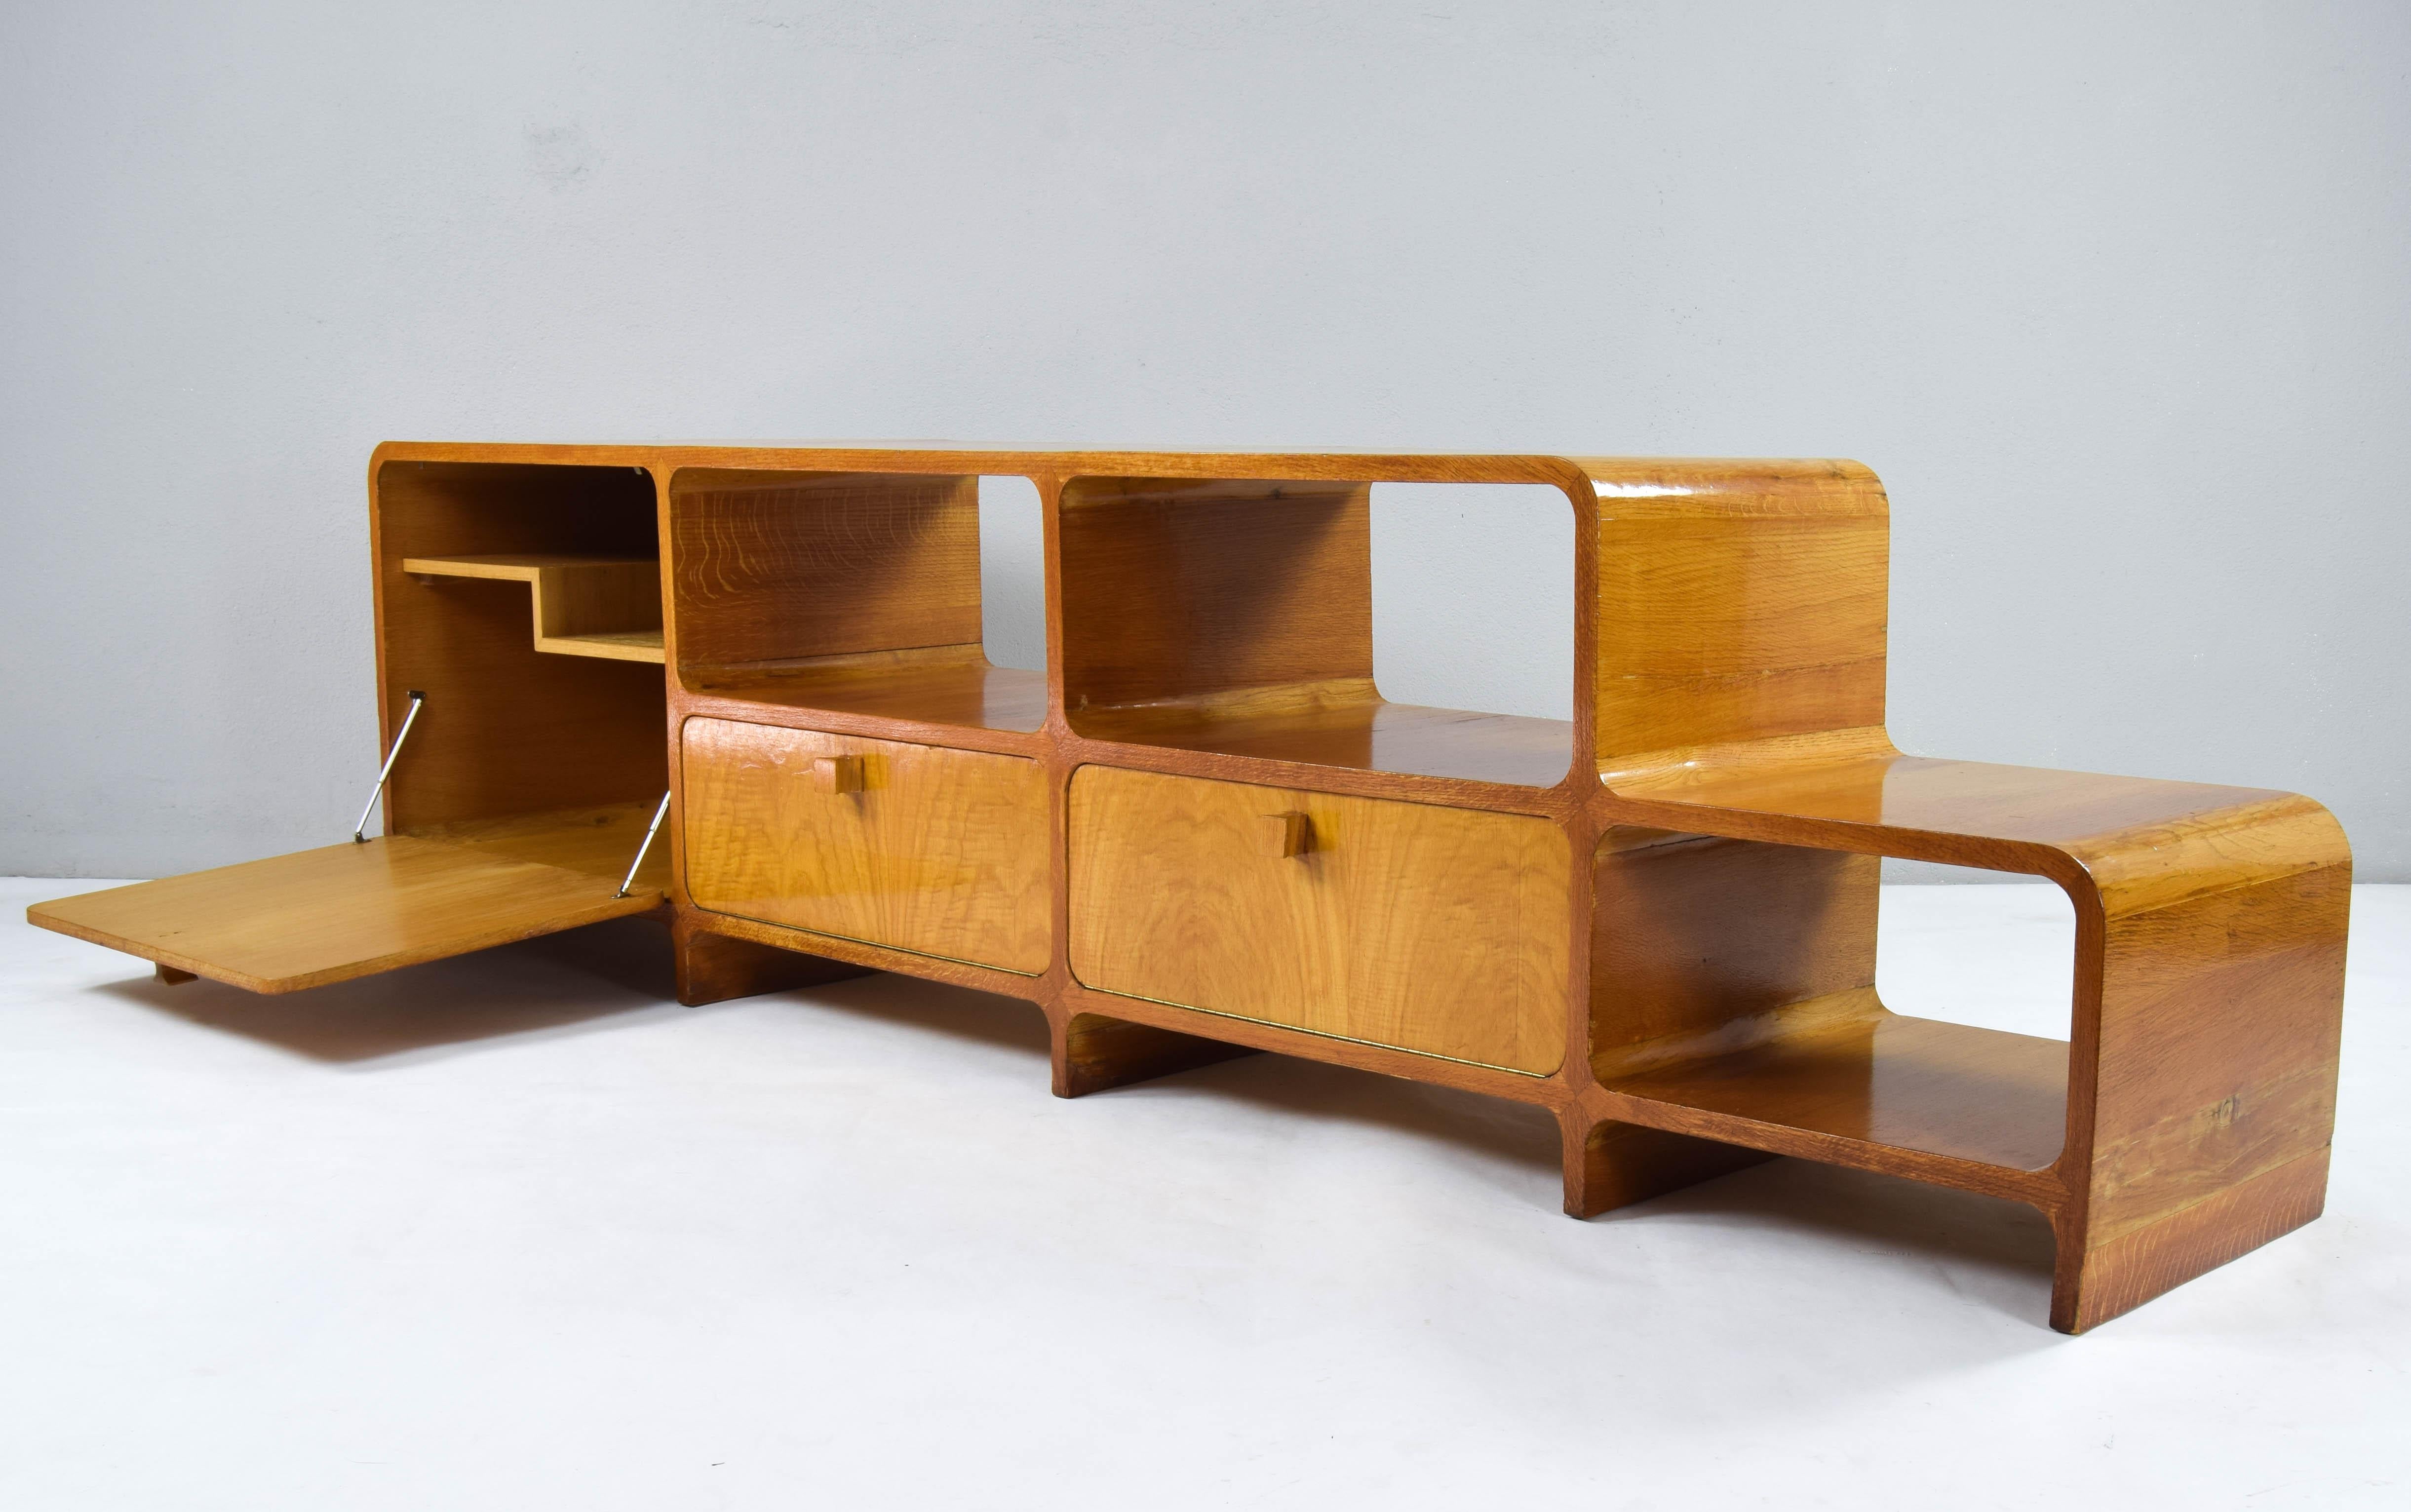 20th Century Large Curved Midcentury Danish Modern Teak Double Sided Space Divider Sideboard